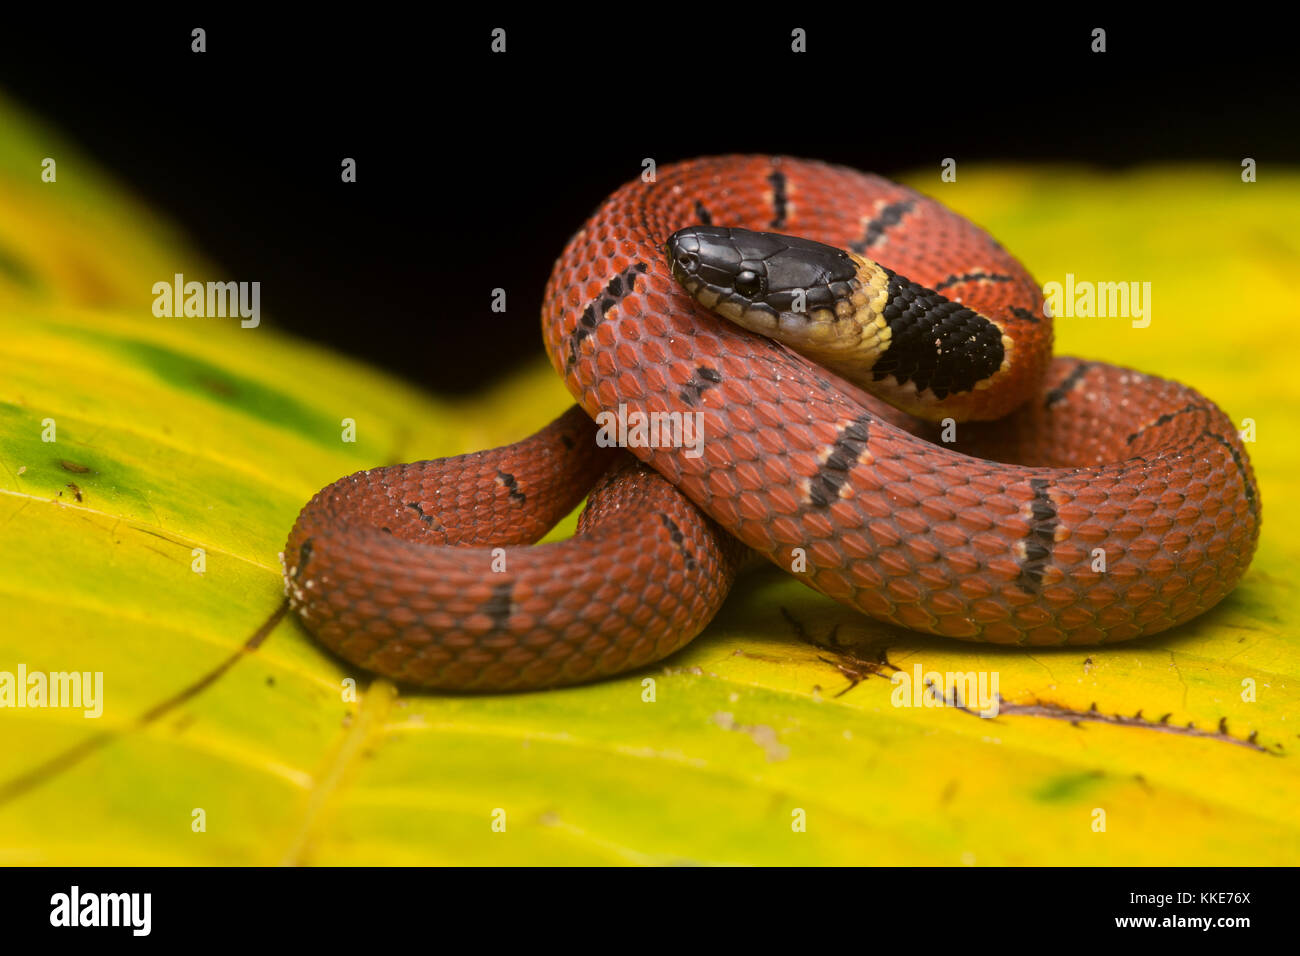 A red coffee snake  (Ninia sebae) has the same colors as a dangerous coral snake but is actually totally harmless. Stock Photo